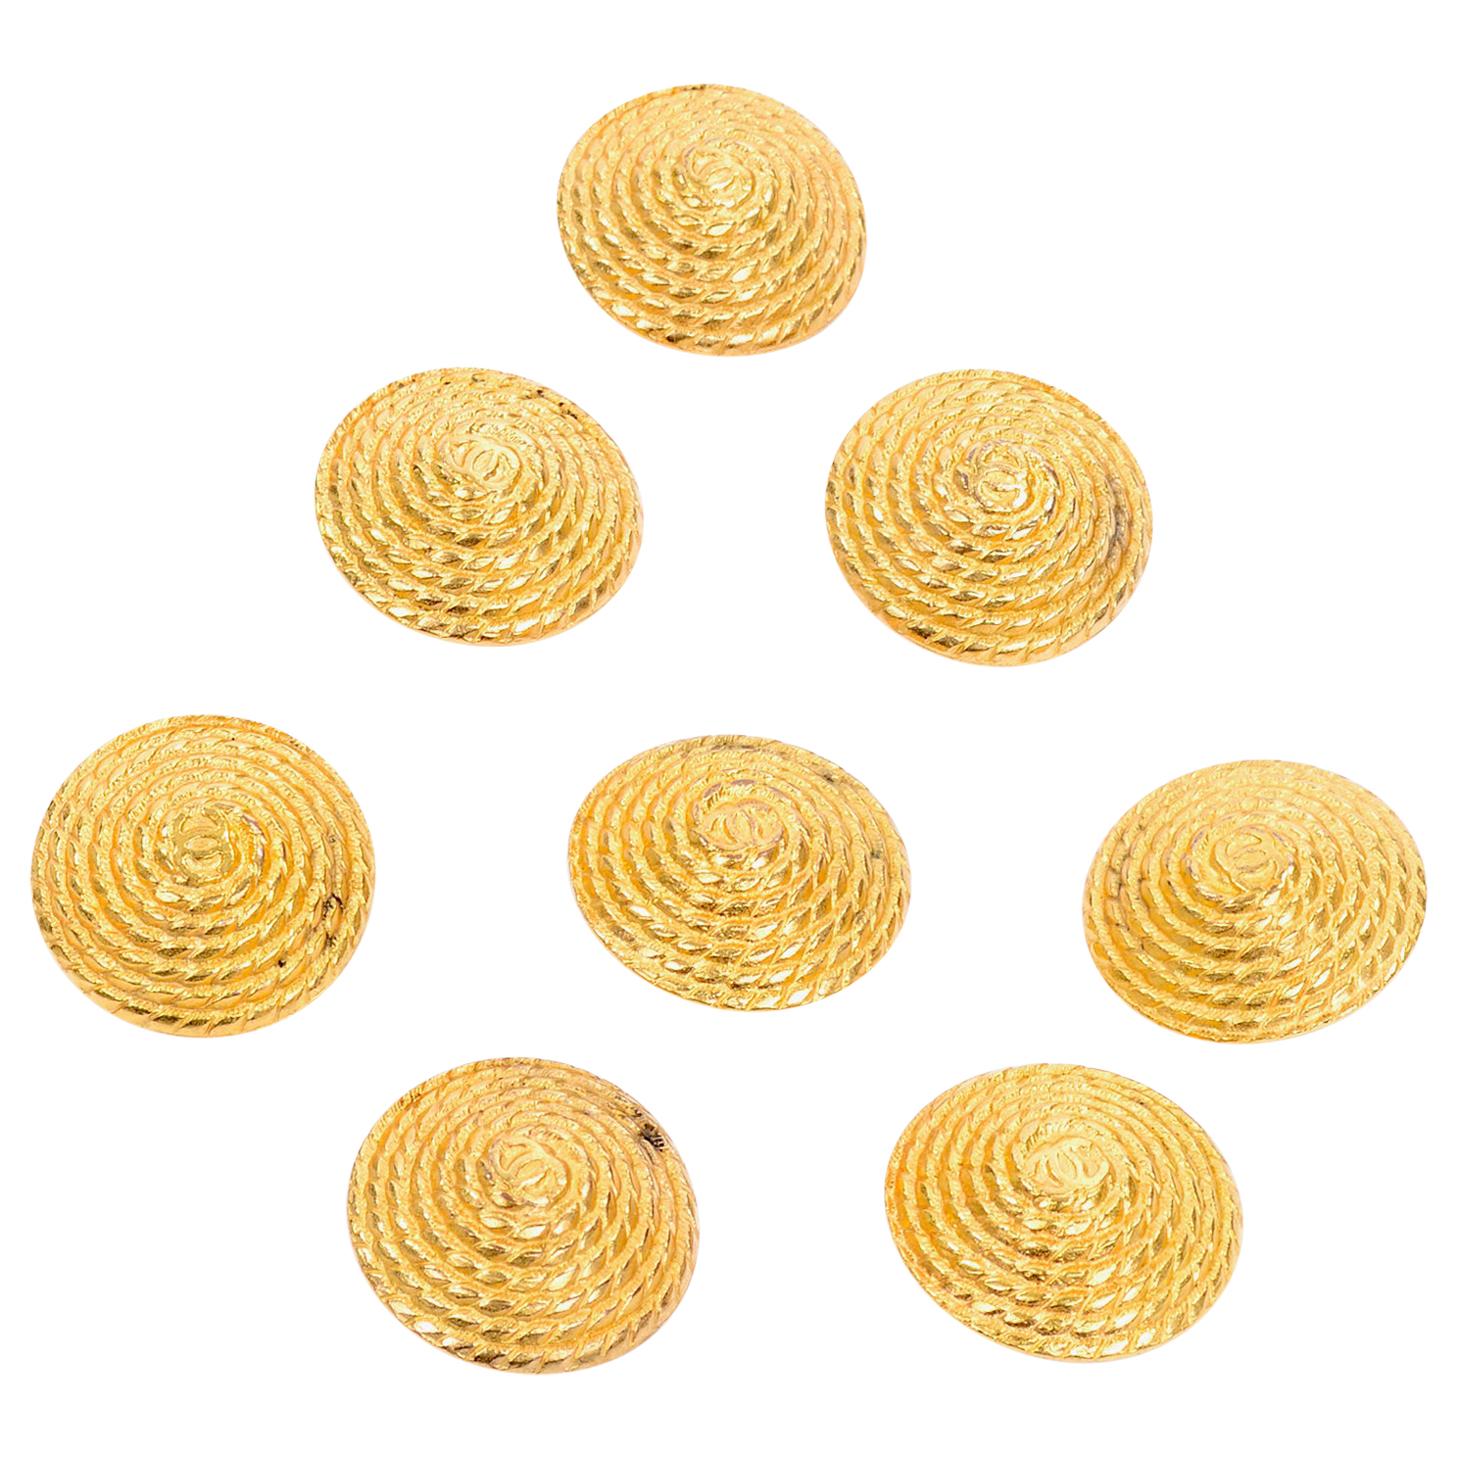 8 Large Vintage Chanel Buttons in Gold W CC Monogram in twisted rope design